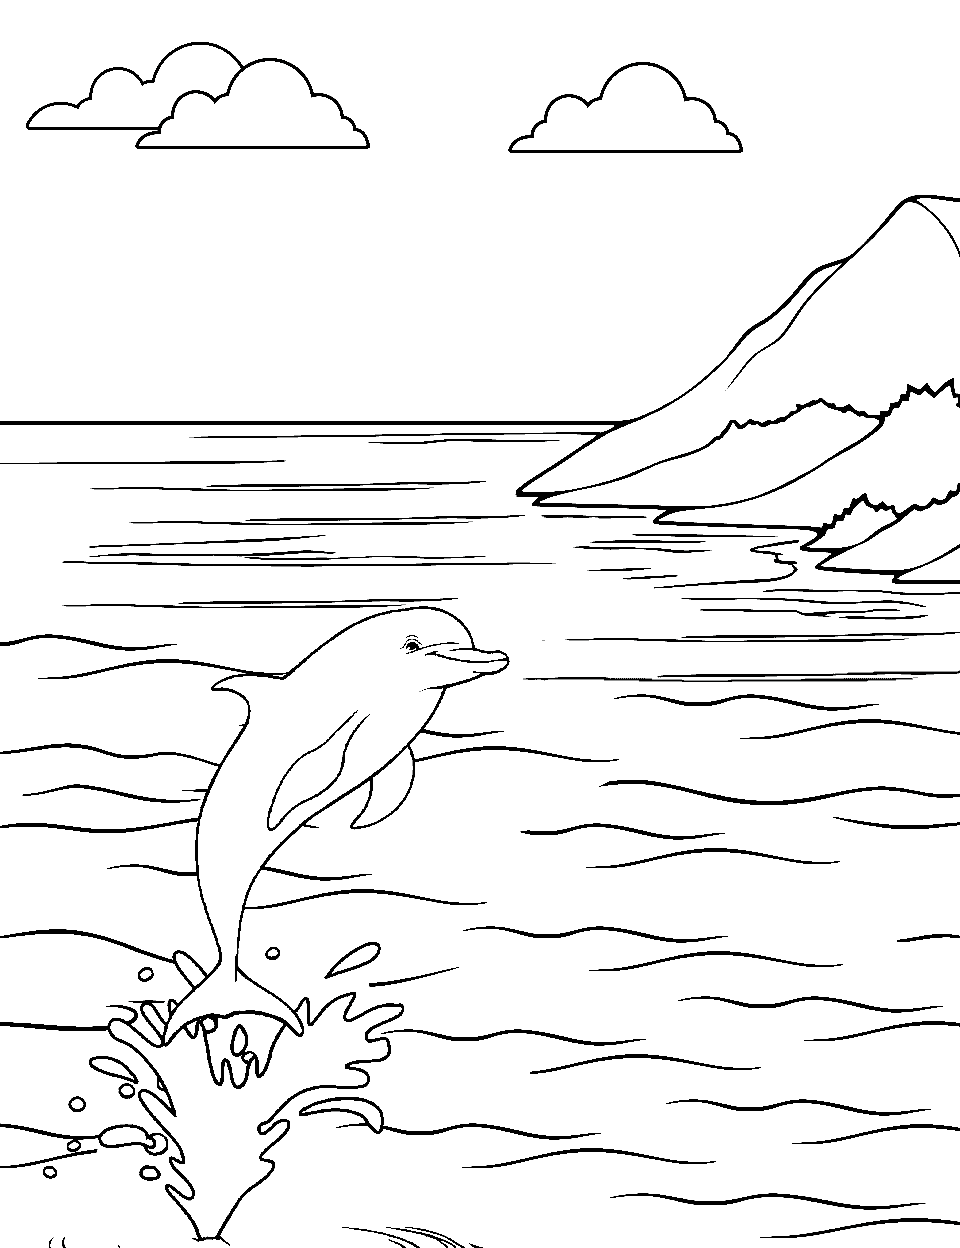 Gentle Dolphin in the Bay Coloring Page - A solitary dolphin calmly jumping from a secluded bay, surrounded by soft hills.